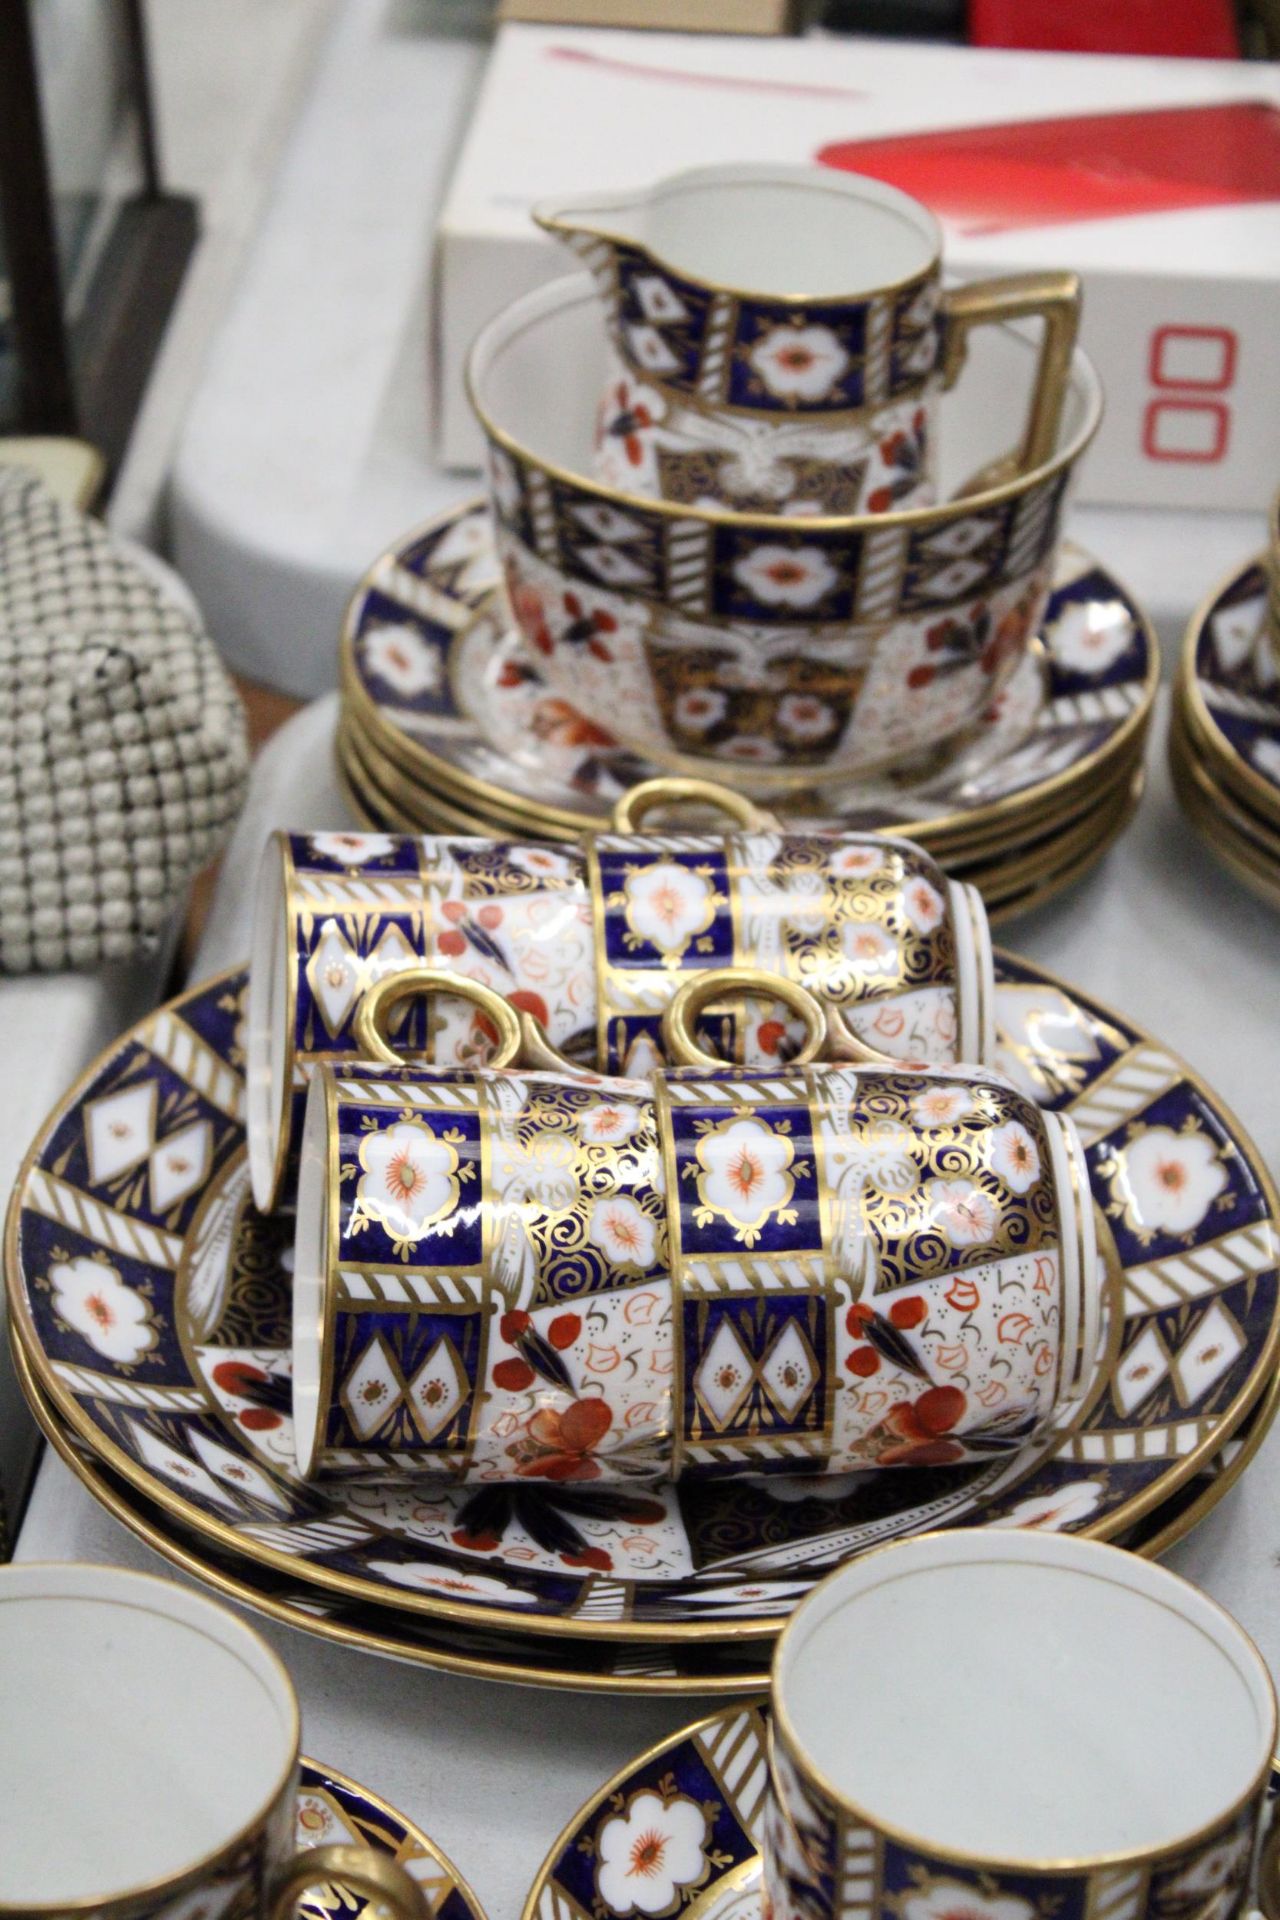 A LARGE QUANTITY OF VINTAGE 'IMARI' PATTERNED TEAWARE TO INCLUDE A SUGAR BOWL, CREAM JUG, CUPS, - Image 2 of 6